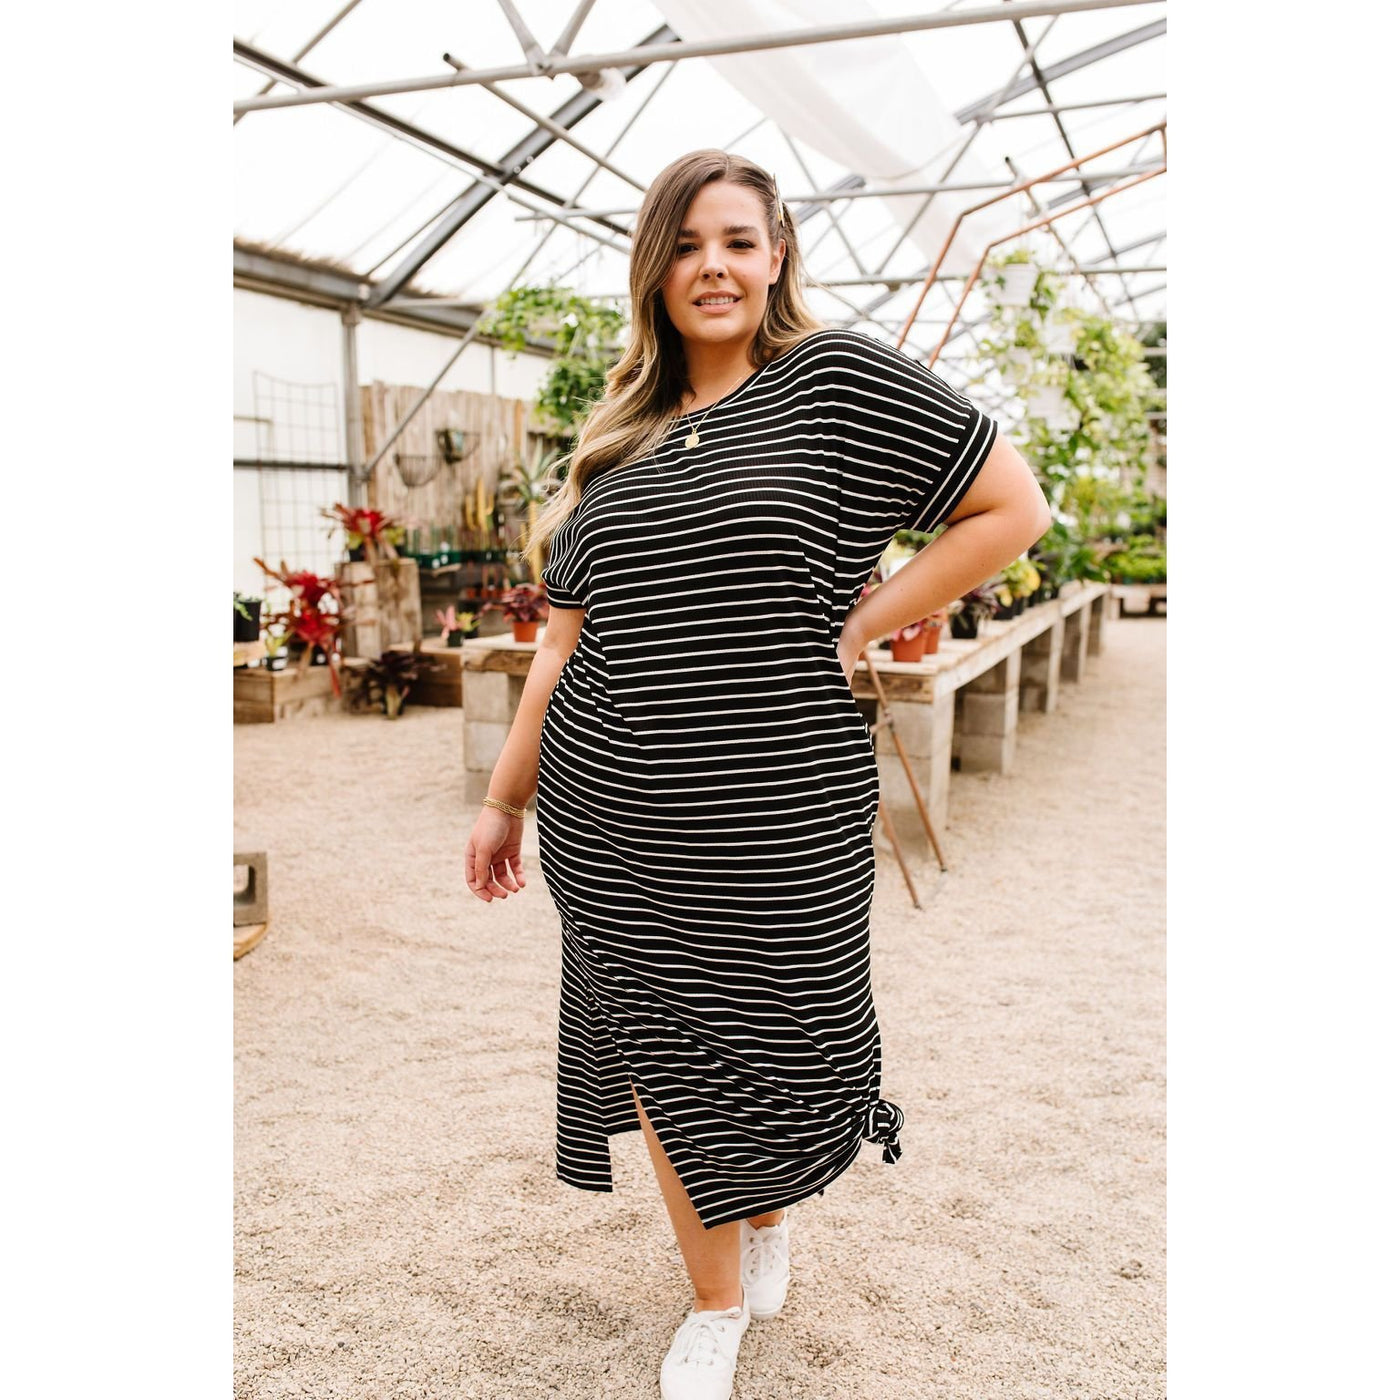 Black Stripes No Gripes Dress-W Dress-Graceful & Chic Boutique, Family Clothing Store in Waxahachie, Texas